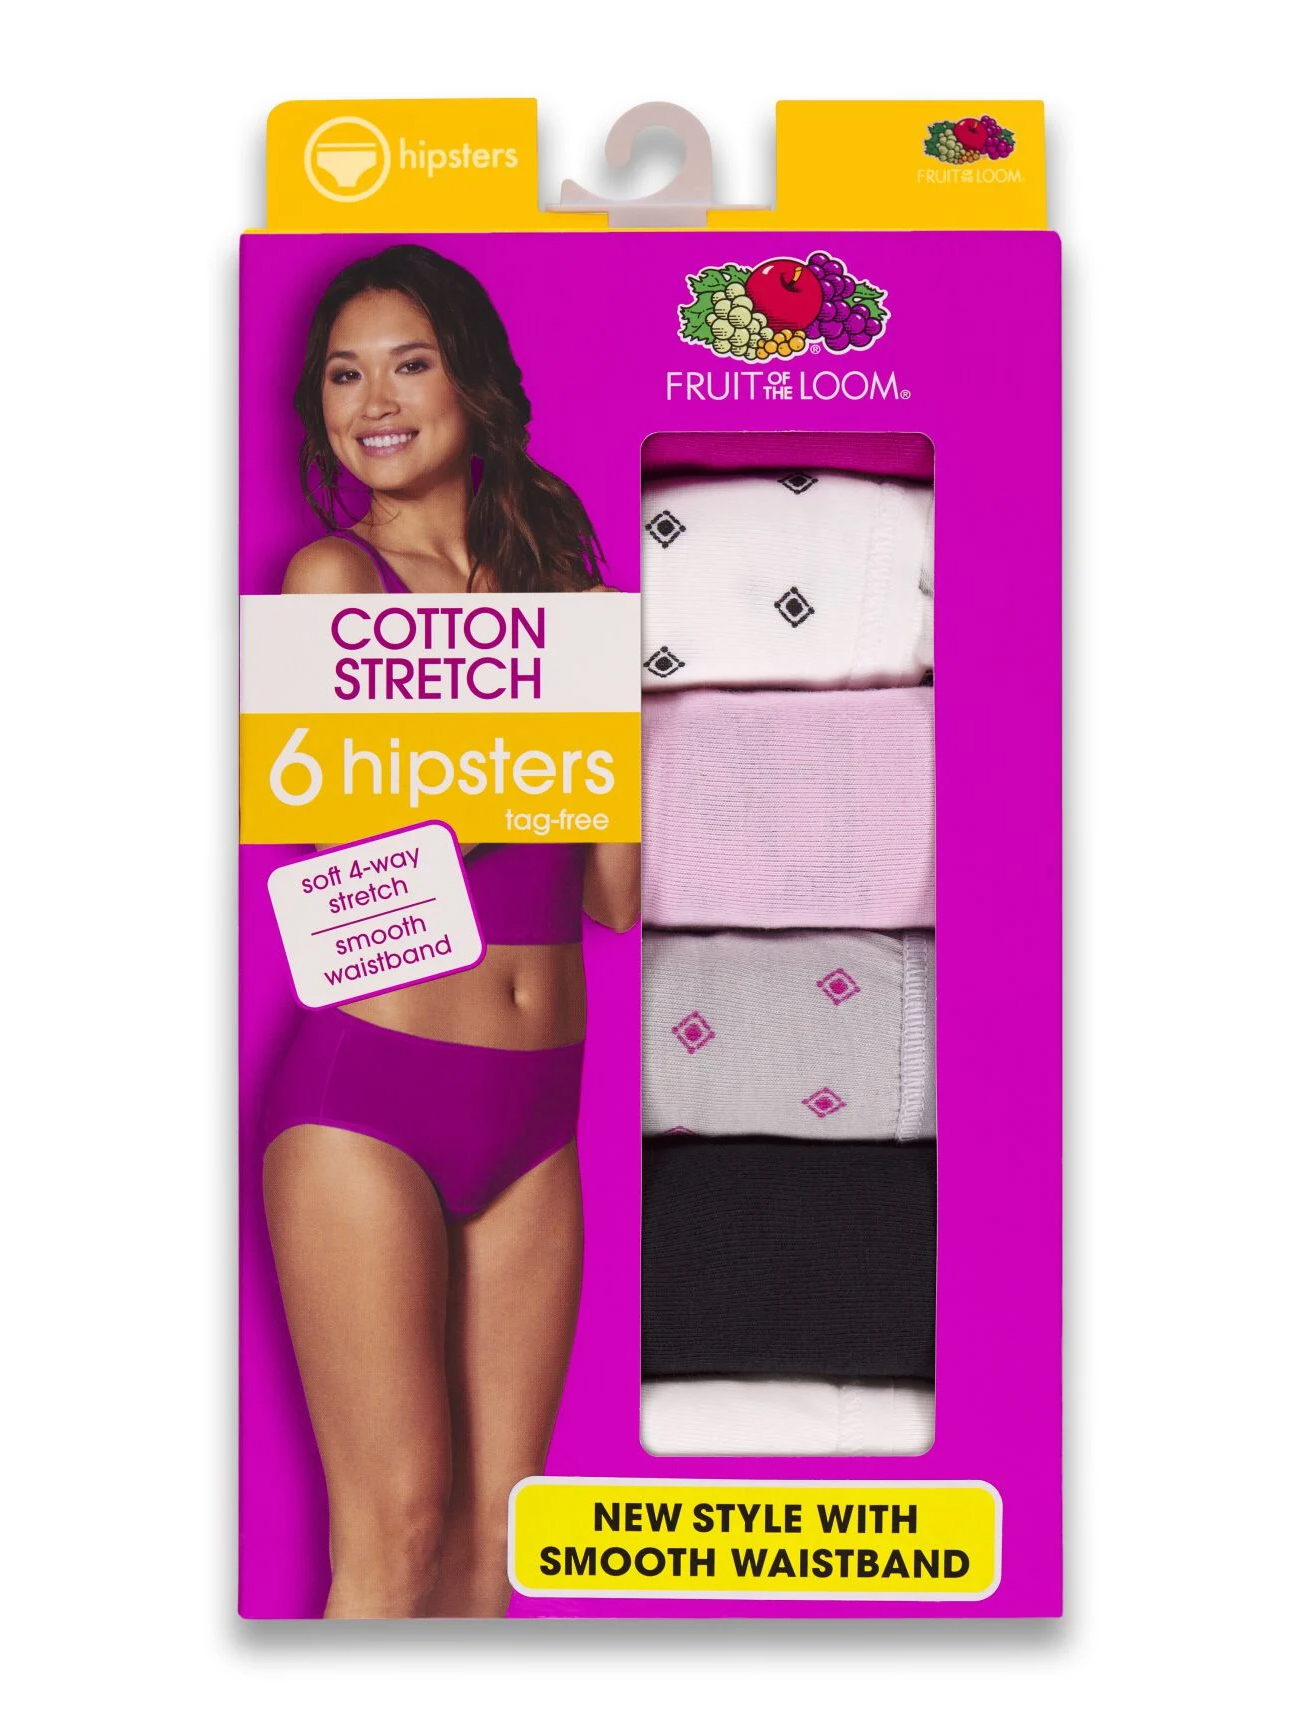 Fruit of the Loom Women's Cotton Stretch Hipster Underwear, 6 Pack